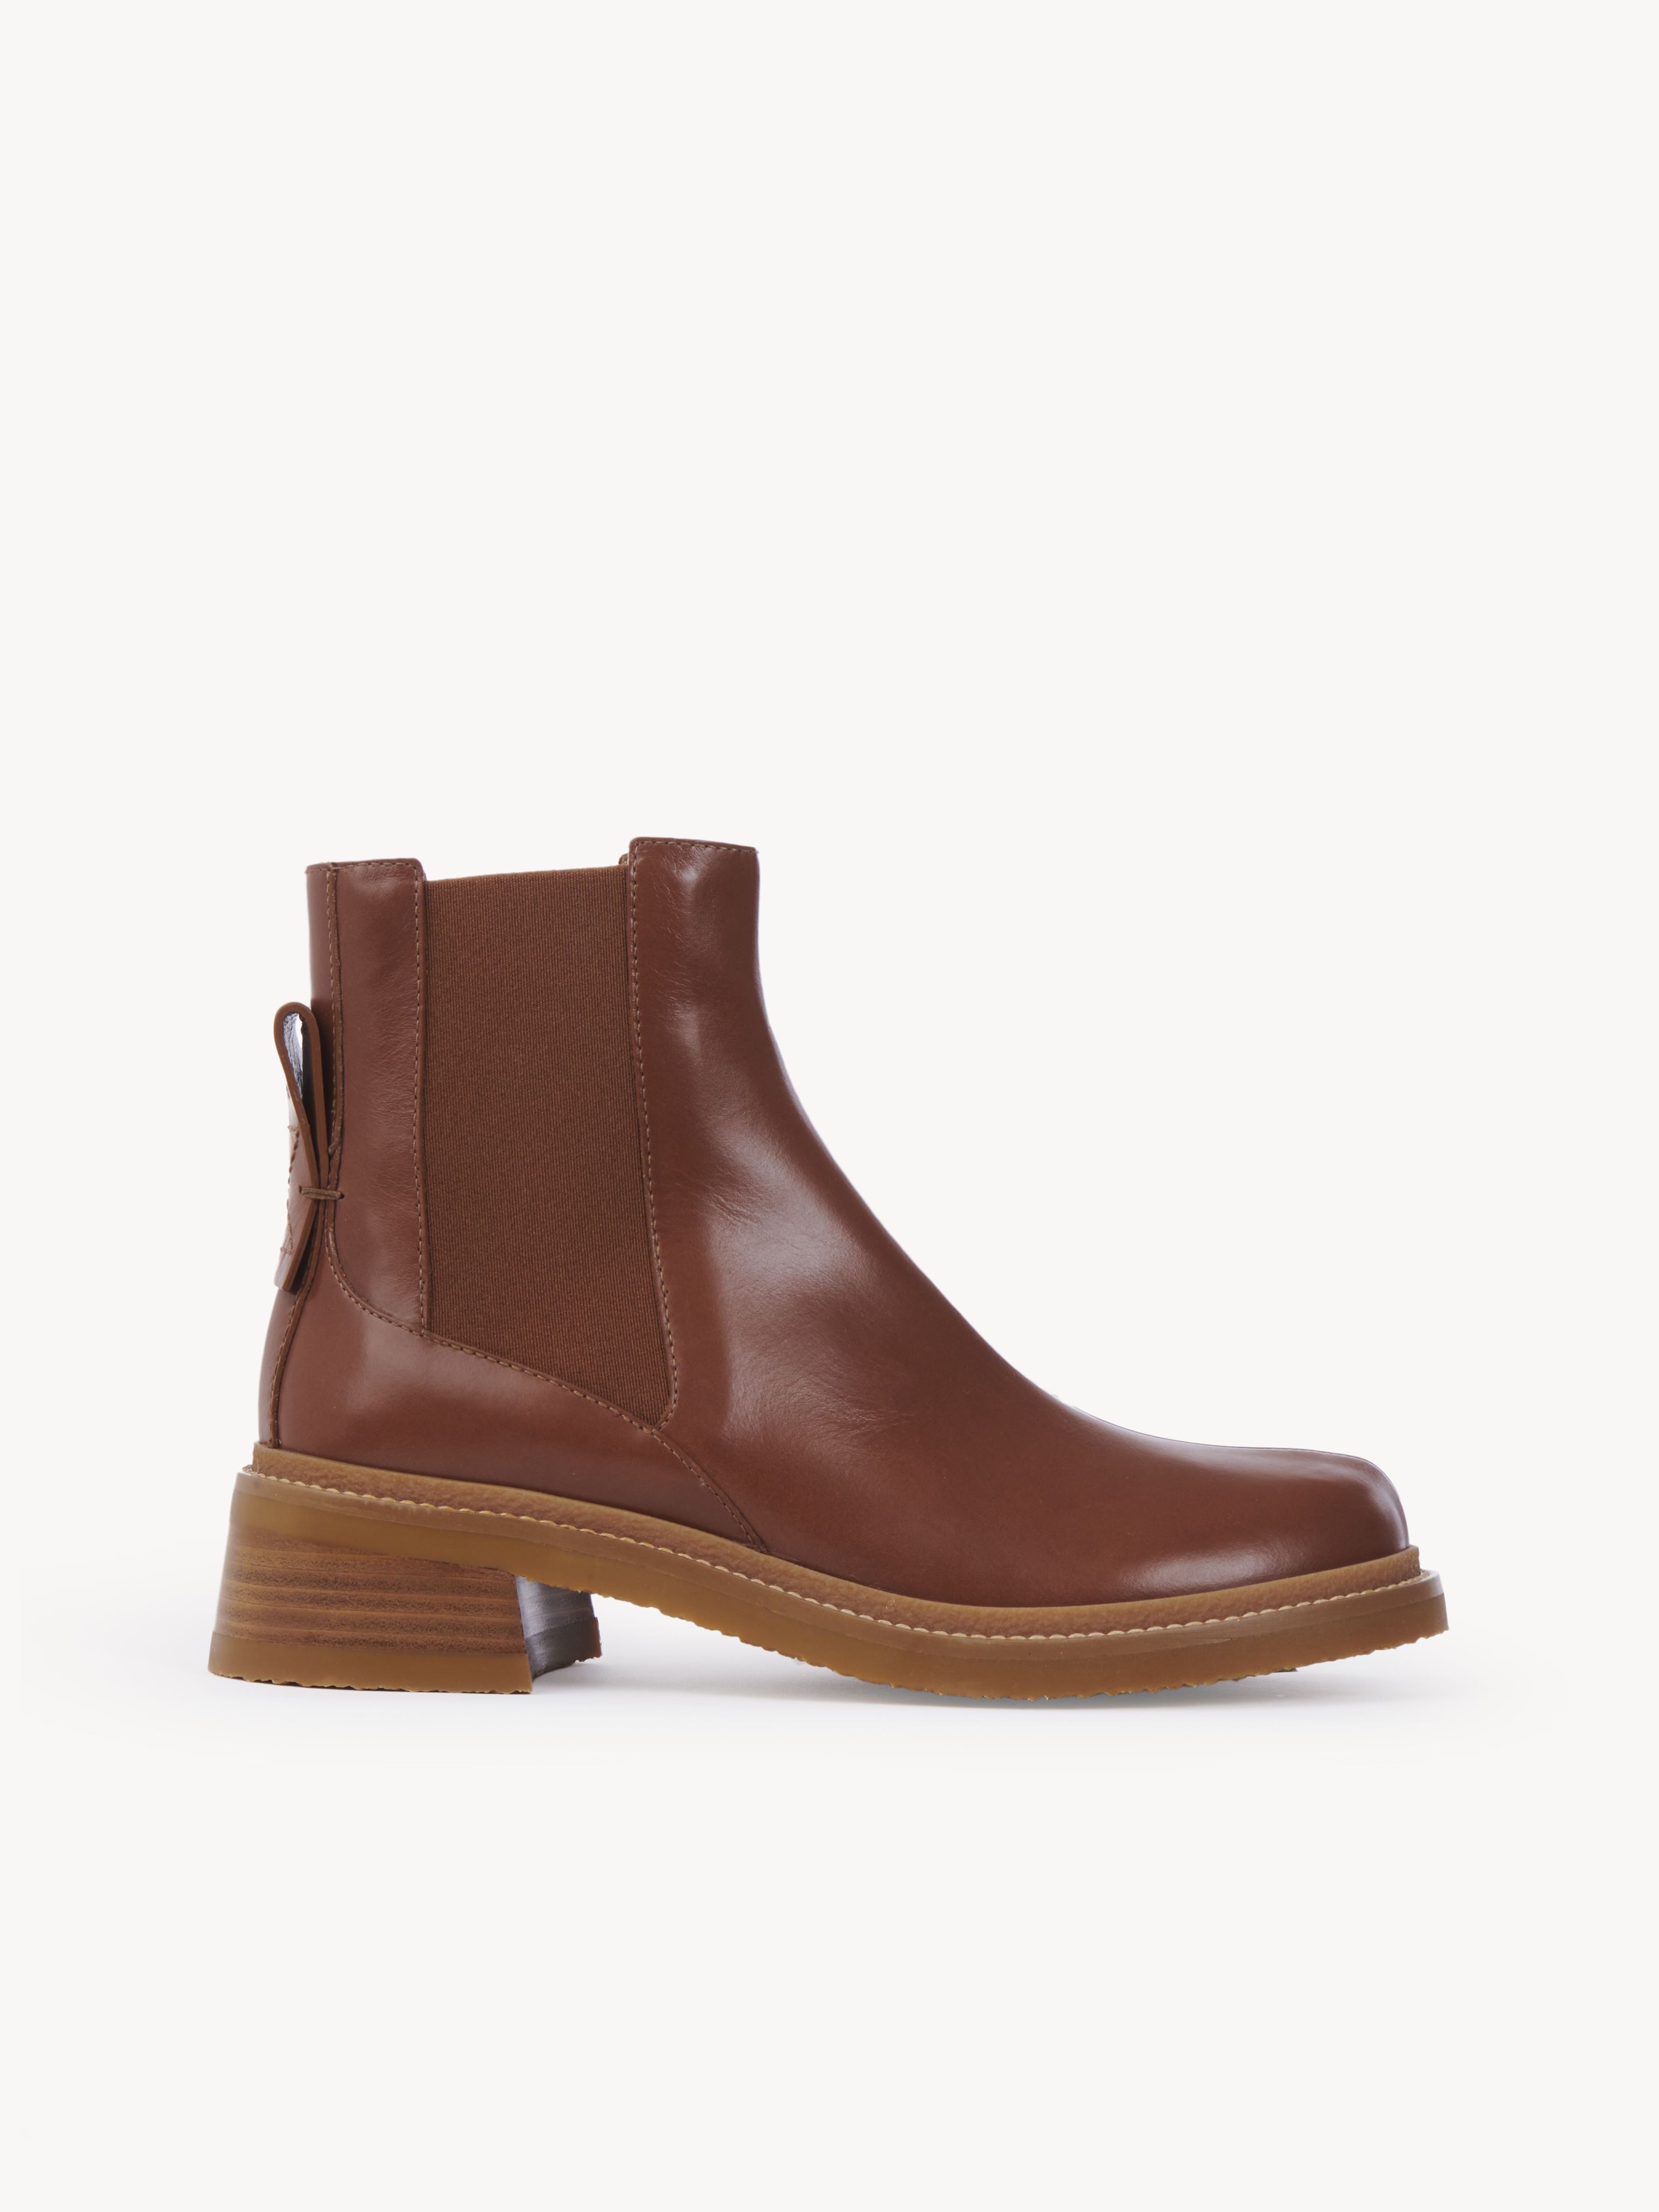 SEE BY CHLOÉ BONNI FLAT CHELSEA BOOT BROWN SIZE 9.5 82% CALF-SKIN LEATHER, 18% SYNTHETIC FIBERS